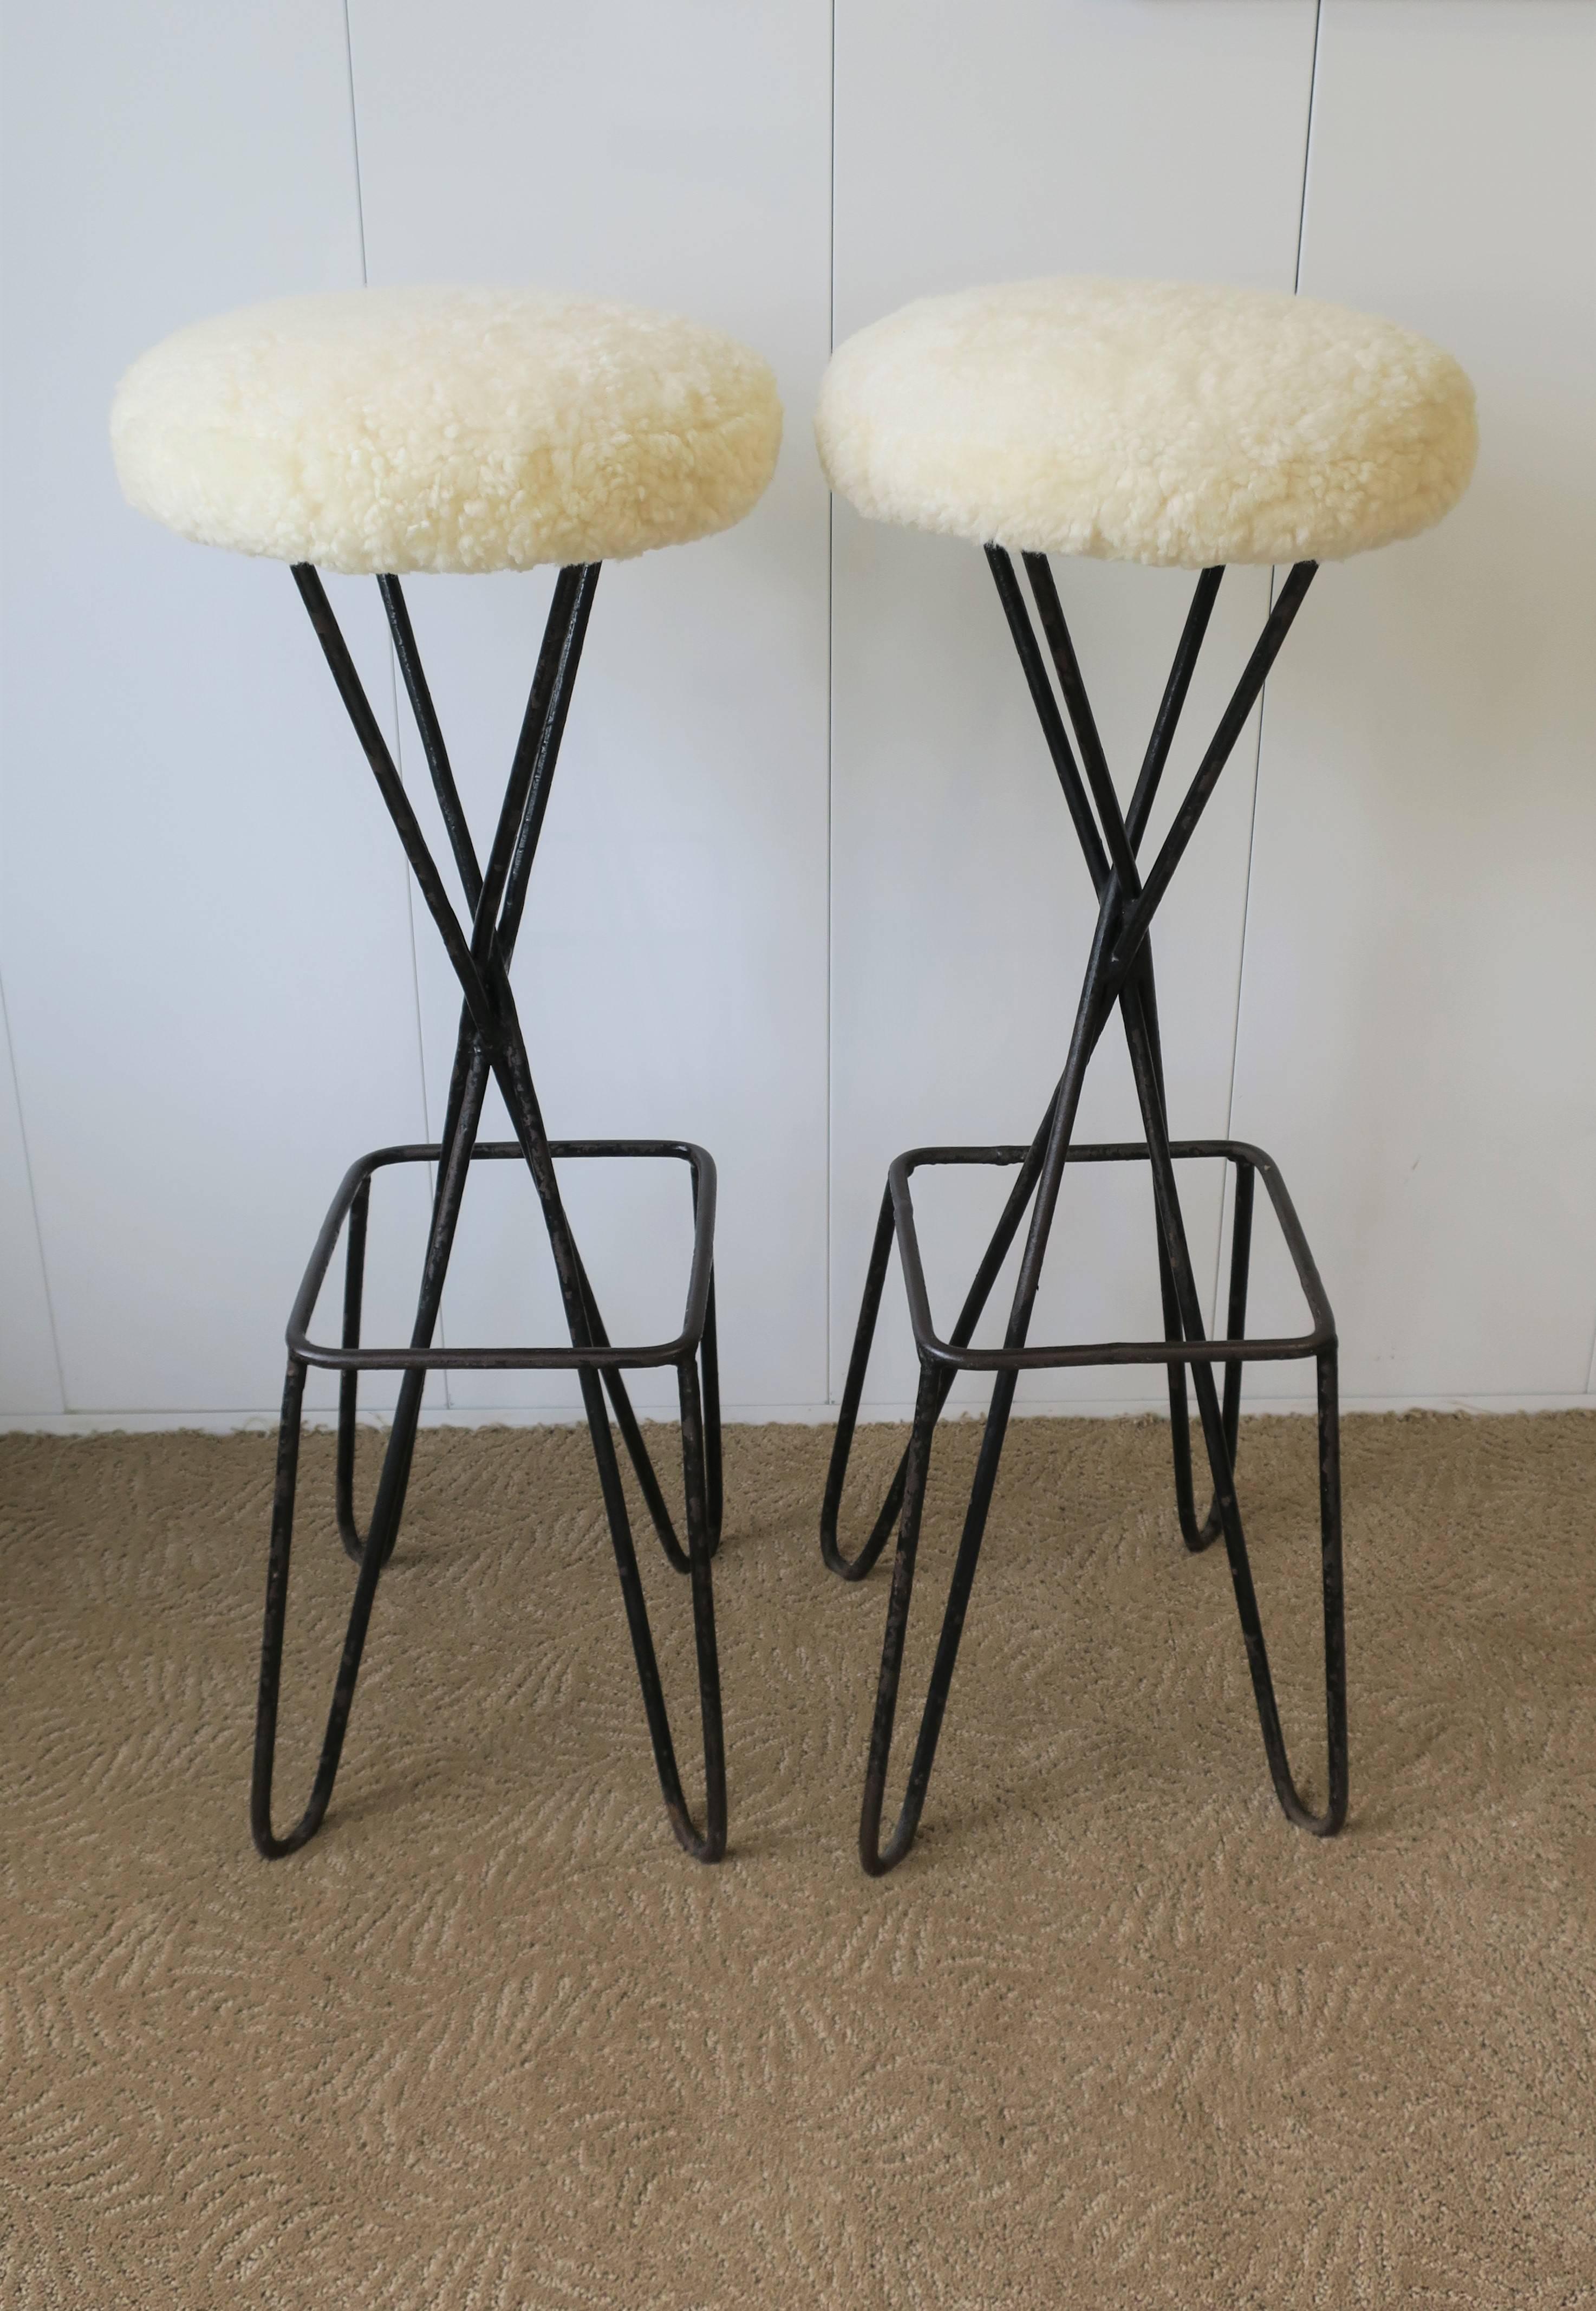 Pair/set available here for $3200
A pair of designer Frederick Weinbeg hairpin black enameled metal bar stools with sheepskin-esque upholstered seats, circa mid-20th century. This substantial pair of stools have newly re-upholstery sheepskin-esque